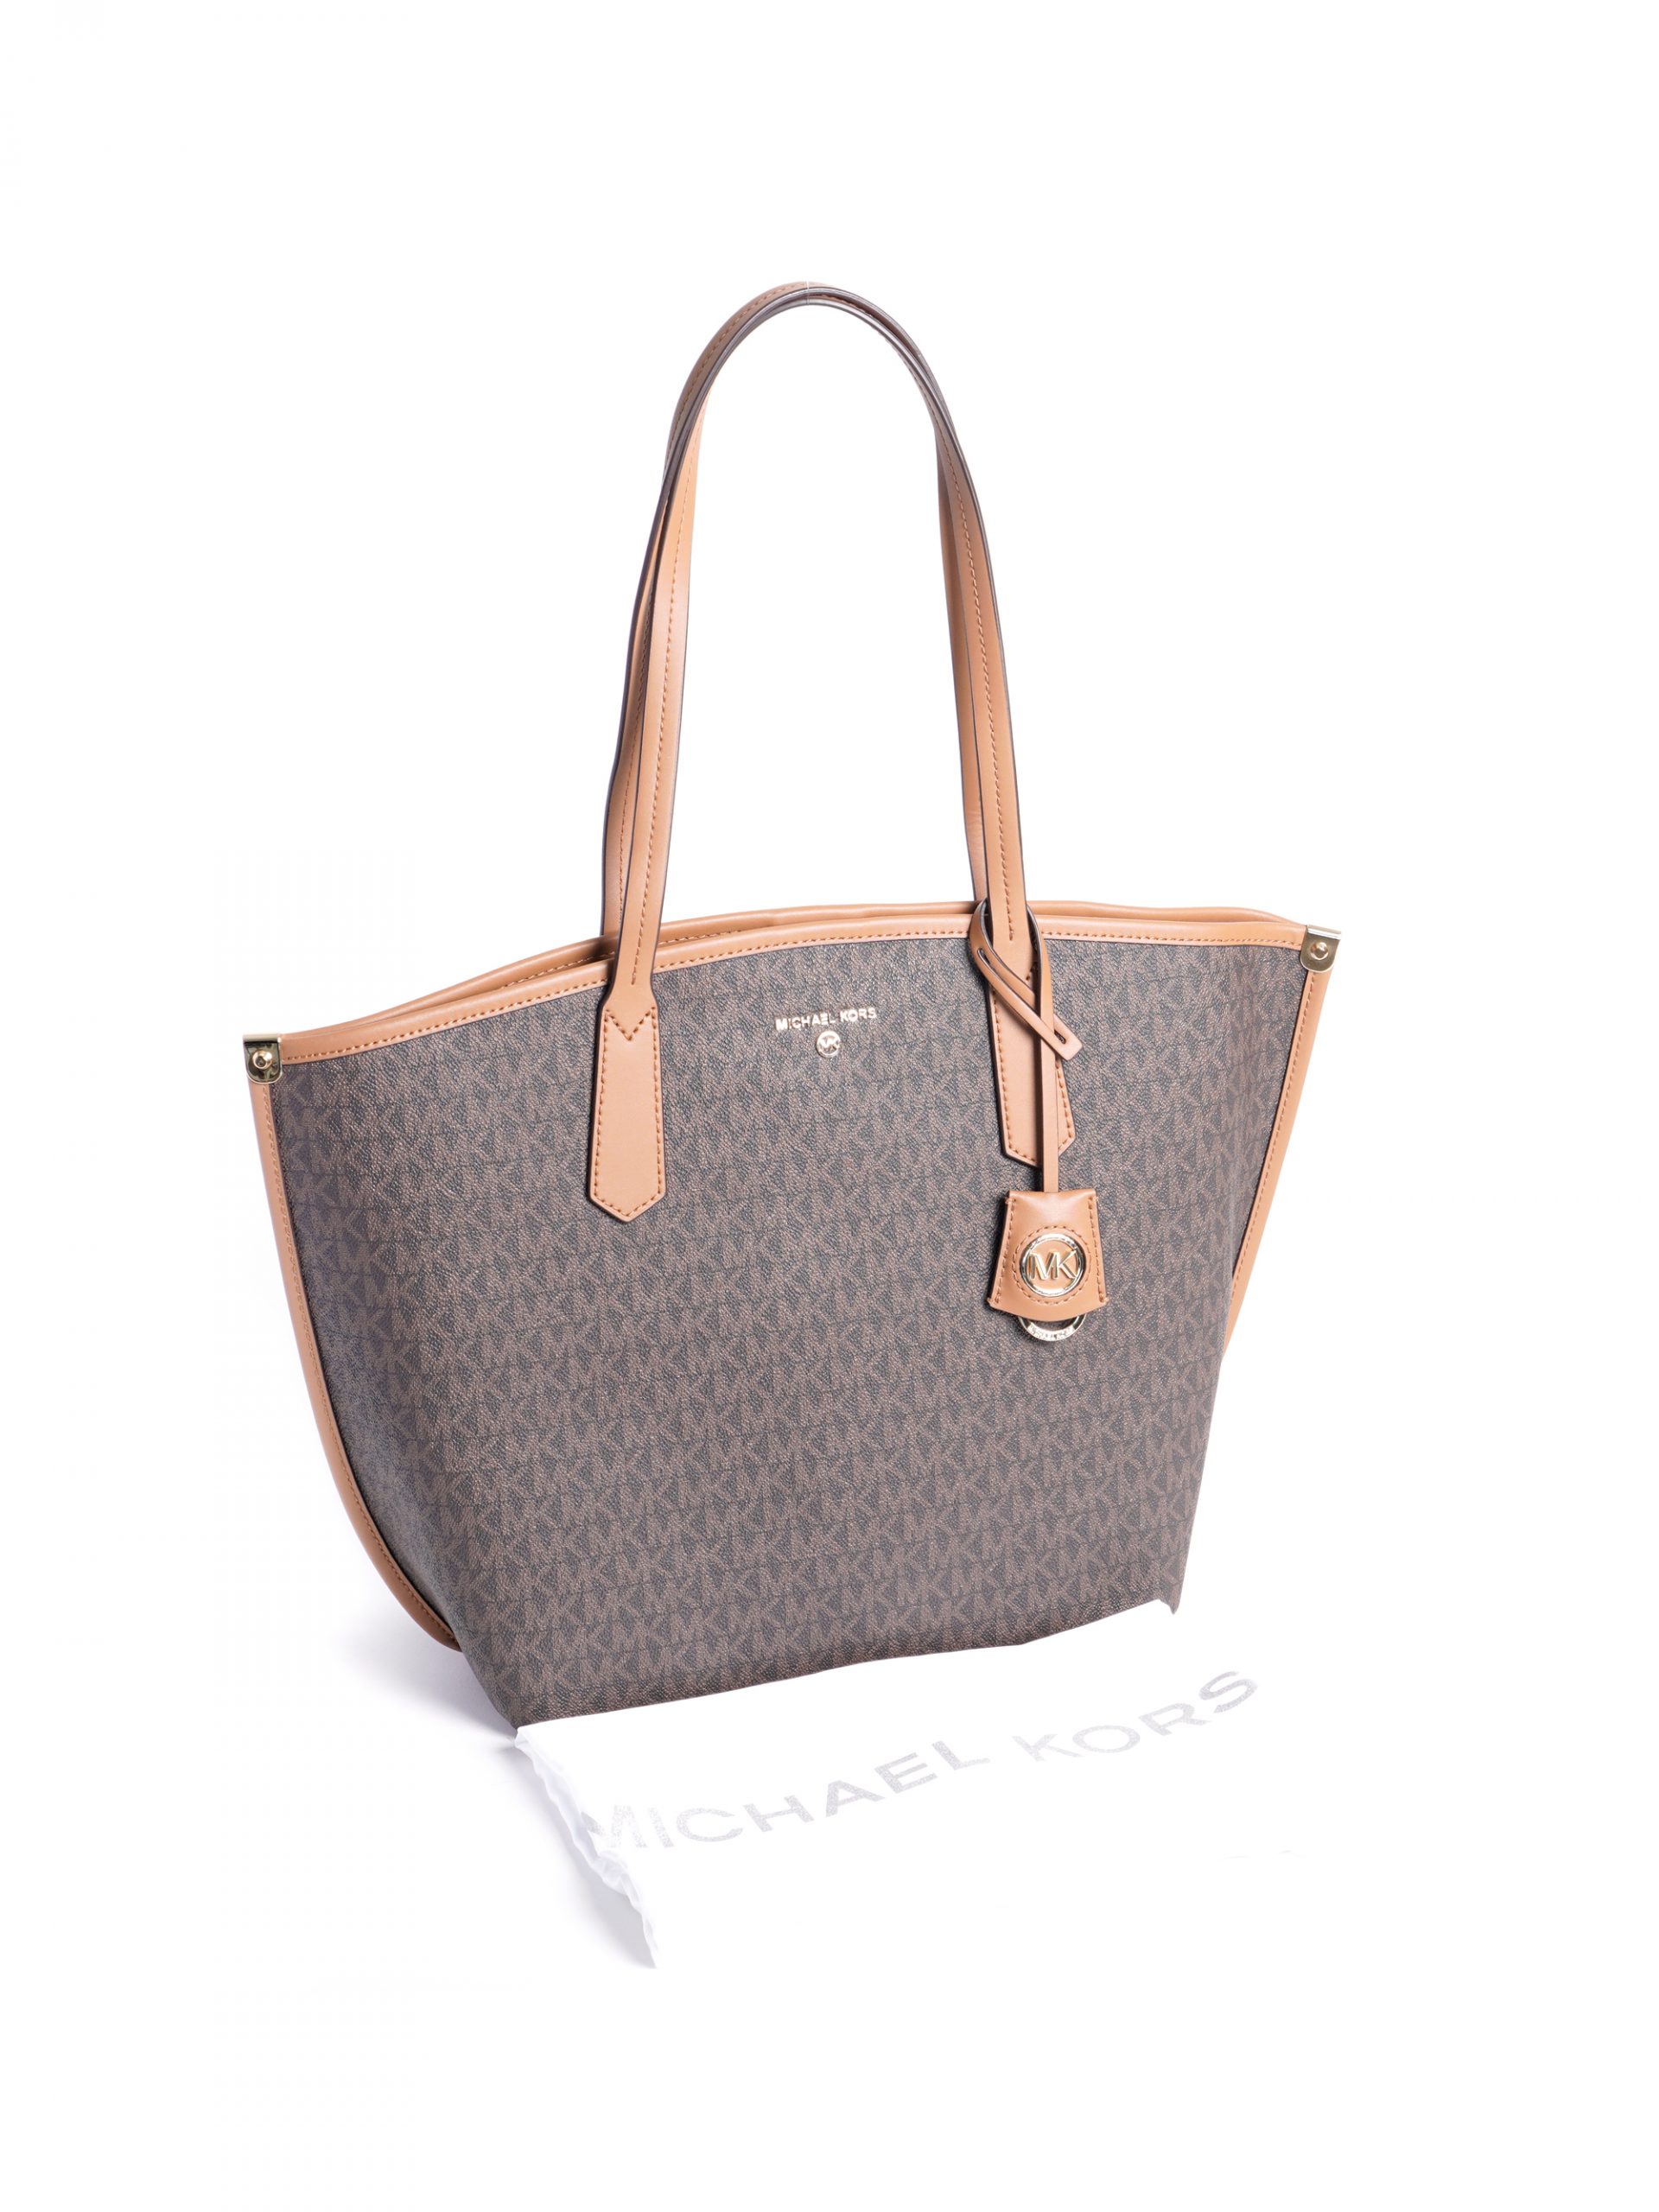 Michael Kors Kenly Large North South Tote Signature Brown - Averand